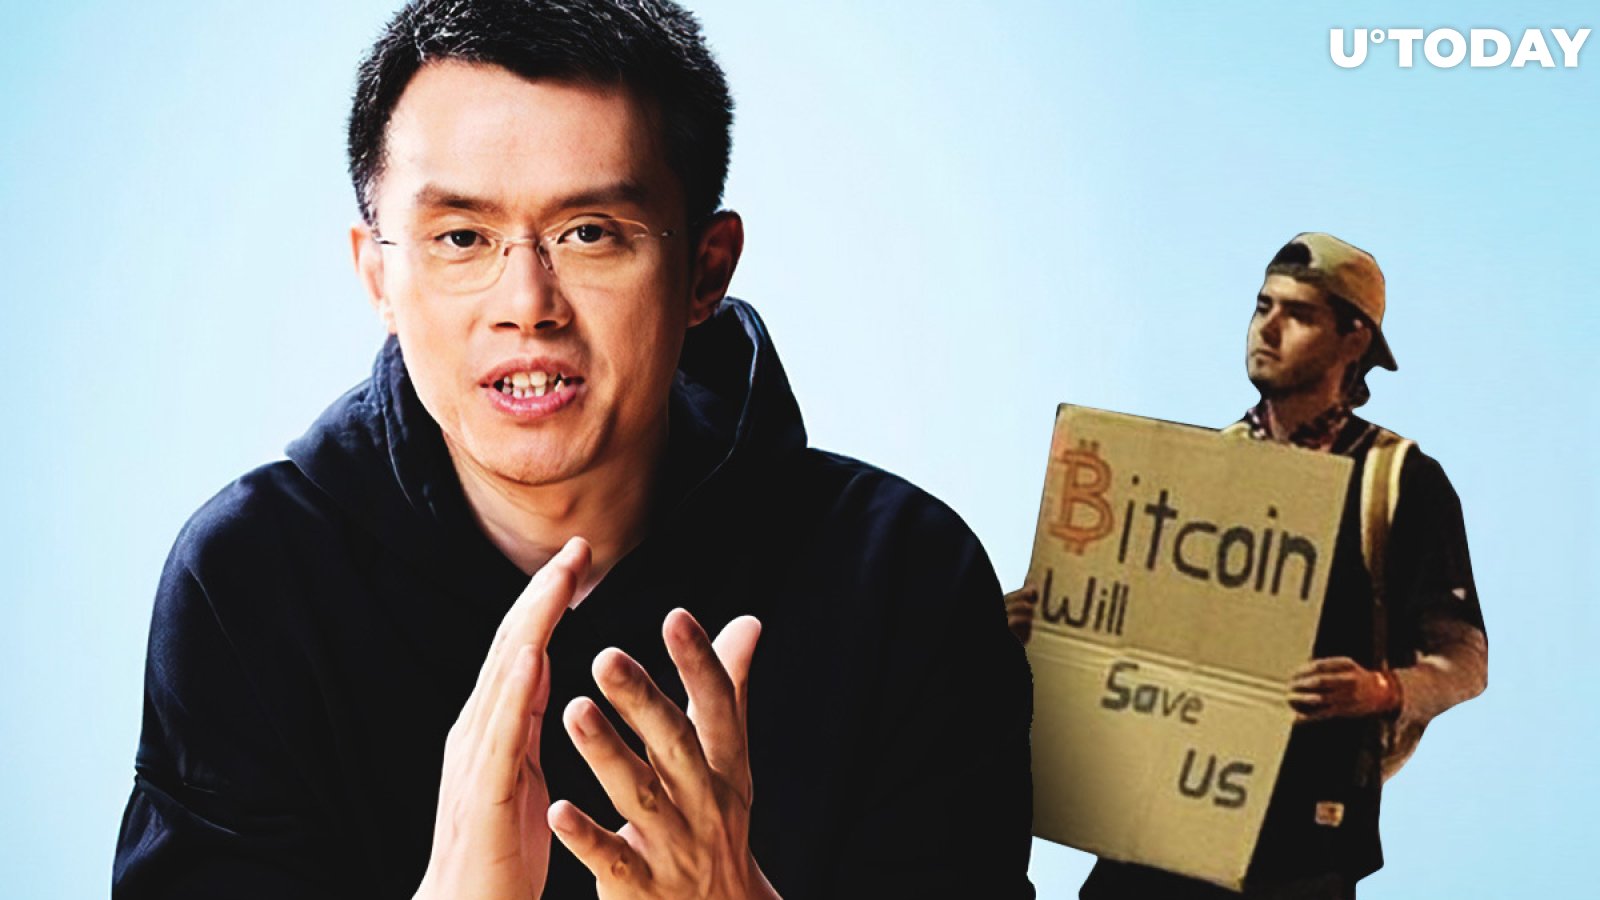  ‘Bitcoin Will Save Us’ Posters Amidst Riots, Binance CEO Calls BTC Peaceful Protest 